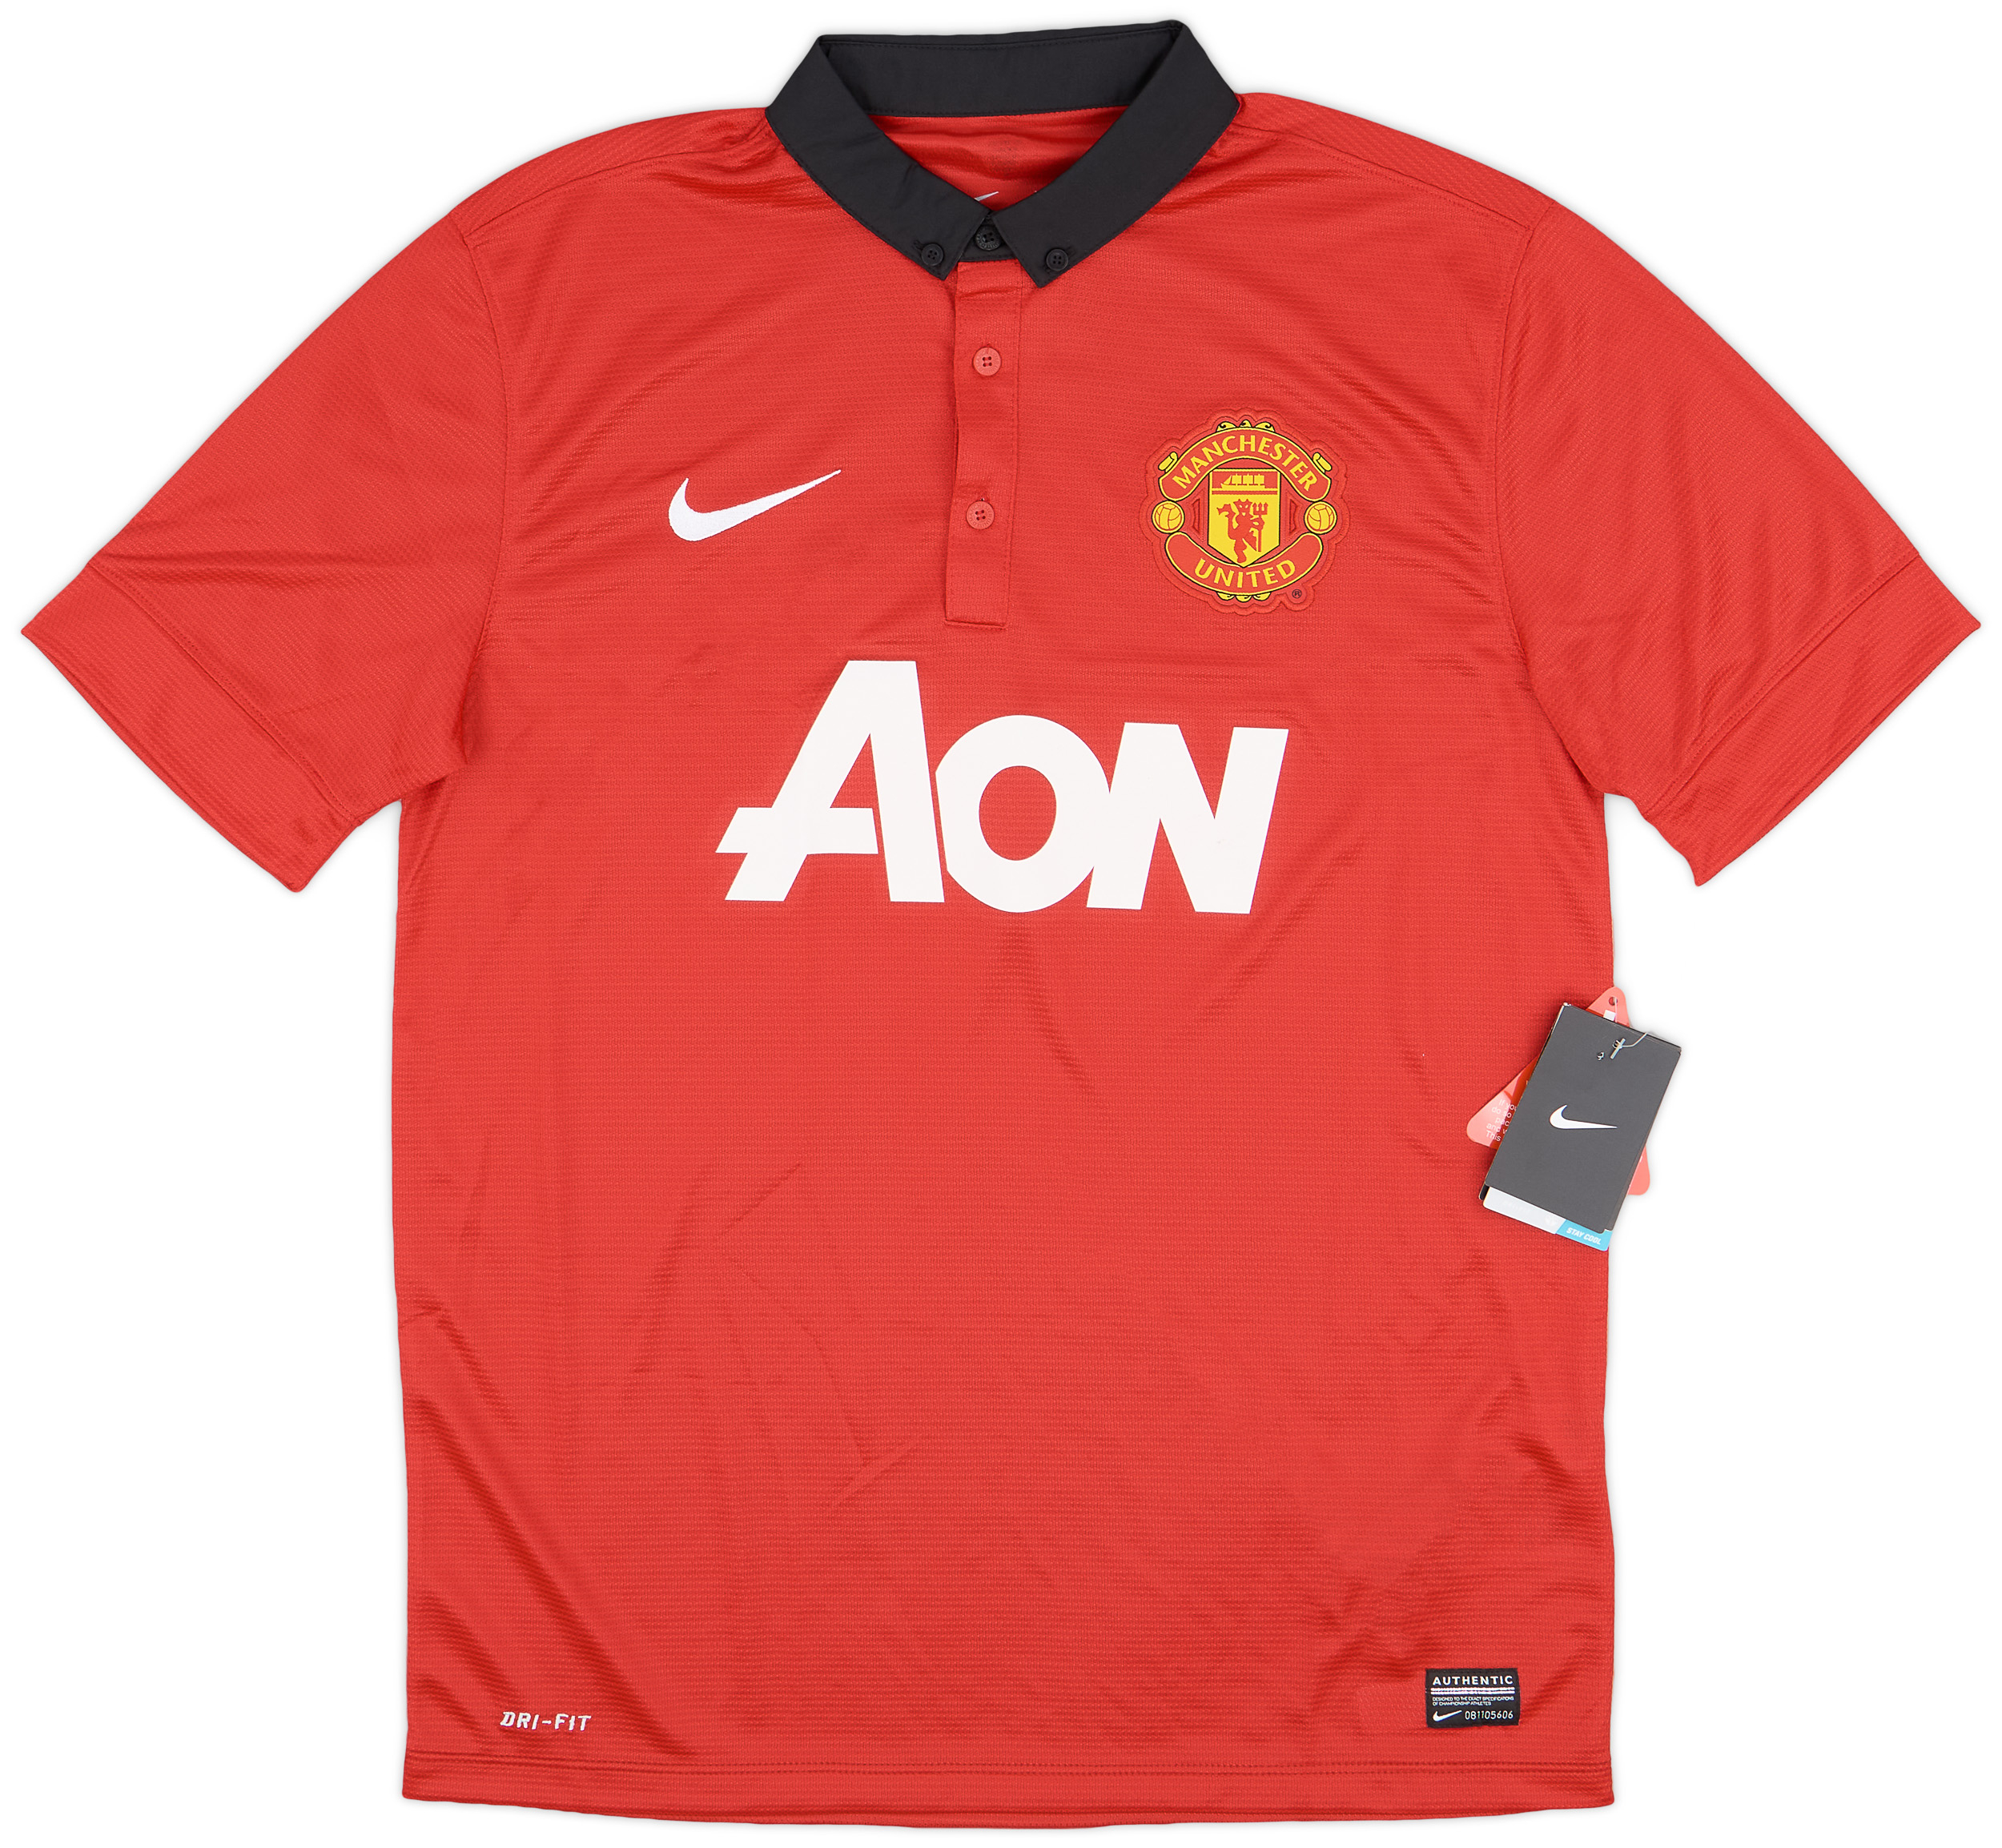 2013-14 Manchester United Home Shirt (M)